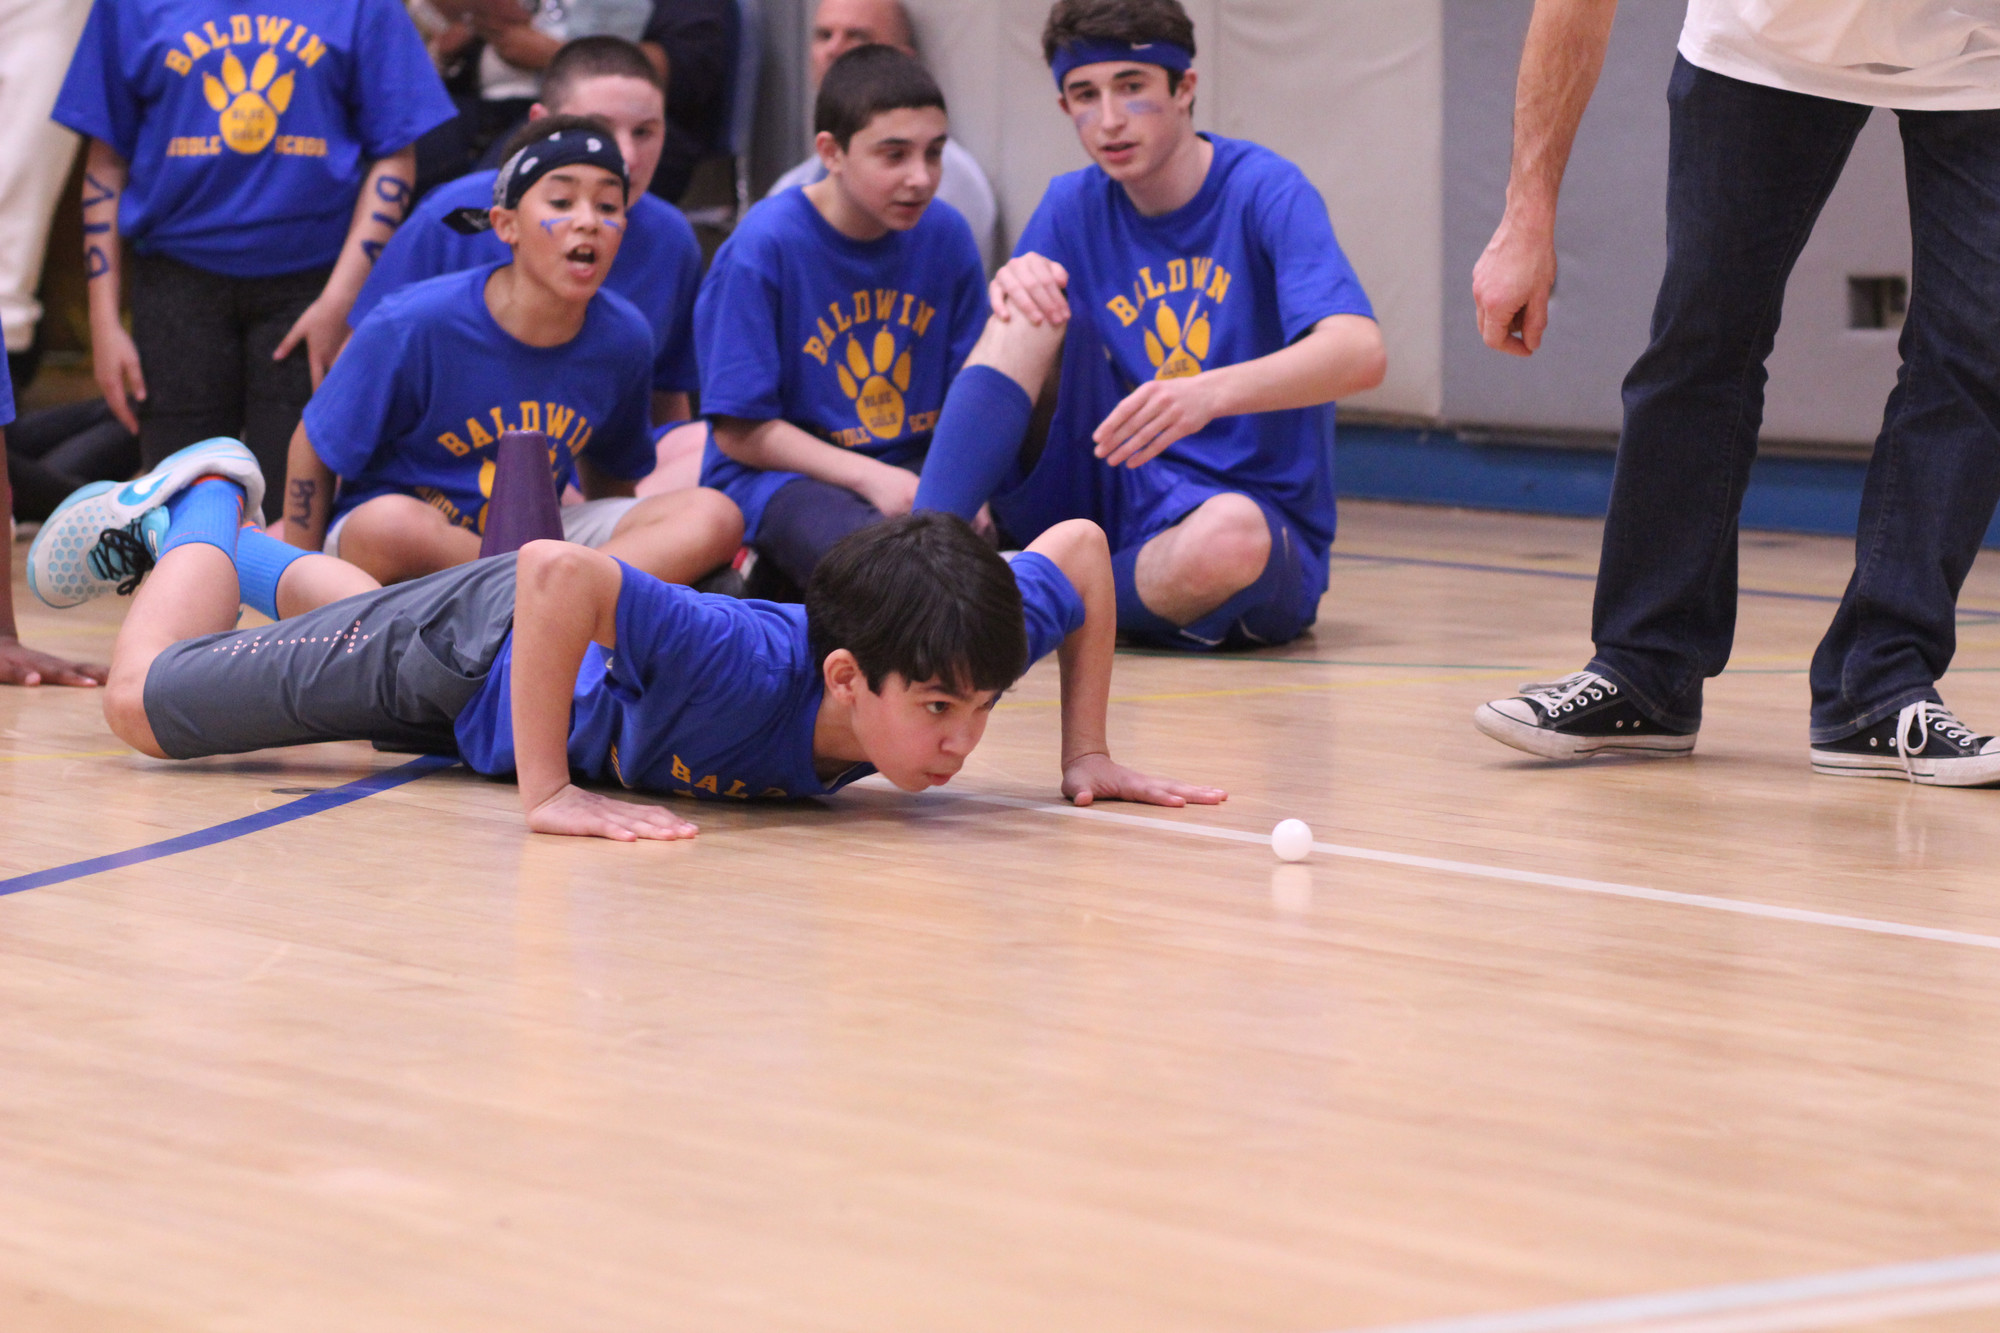 Justin McMackin was urged on by his teammates during the ping-pong relay.